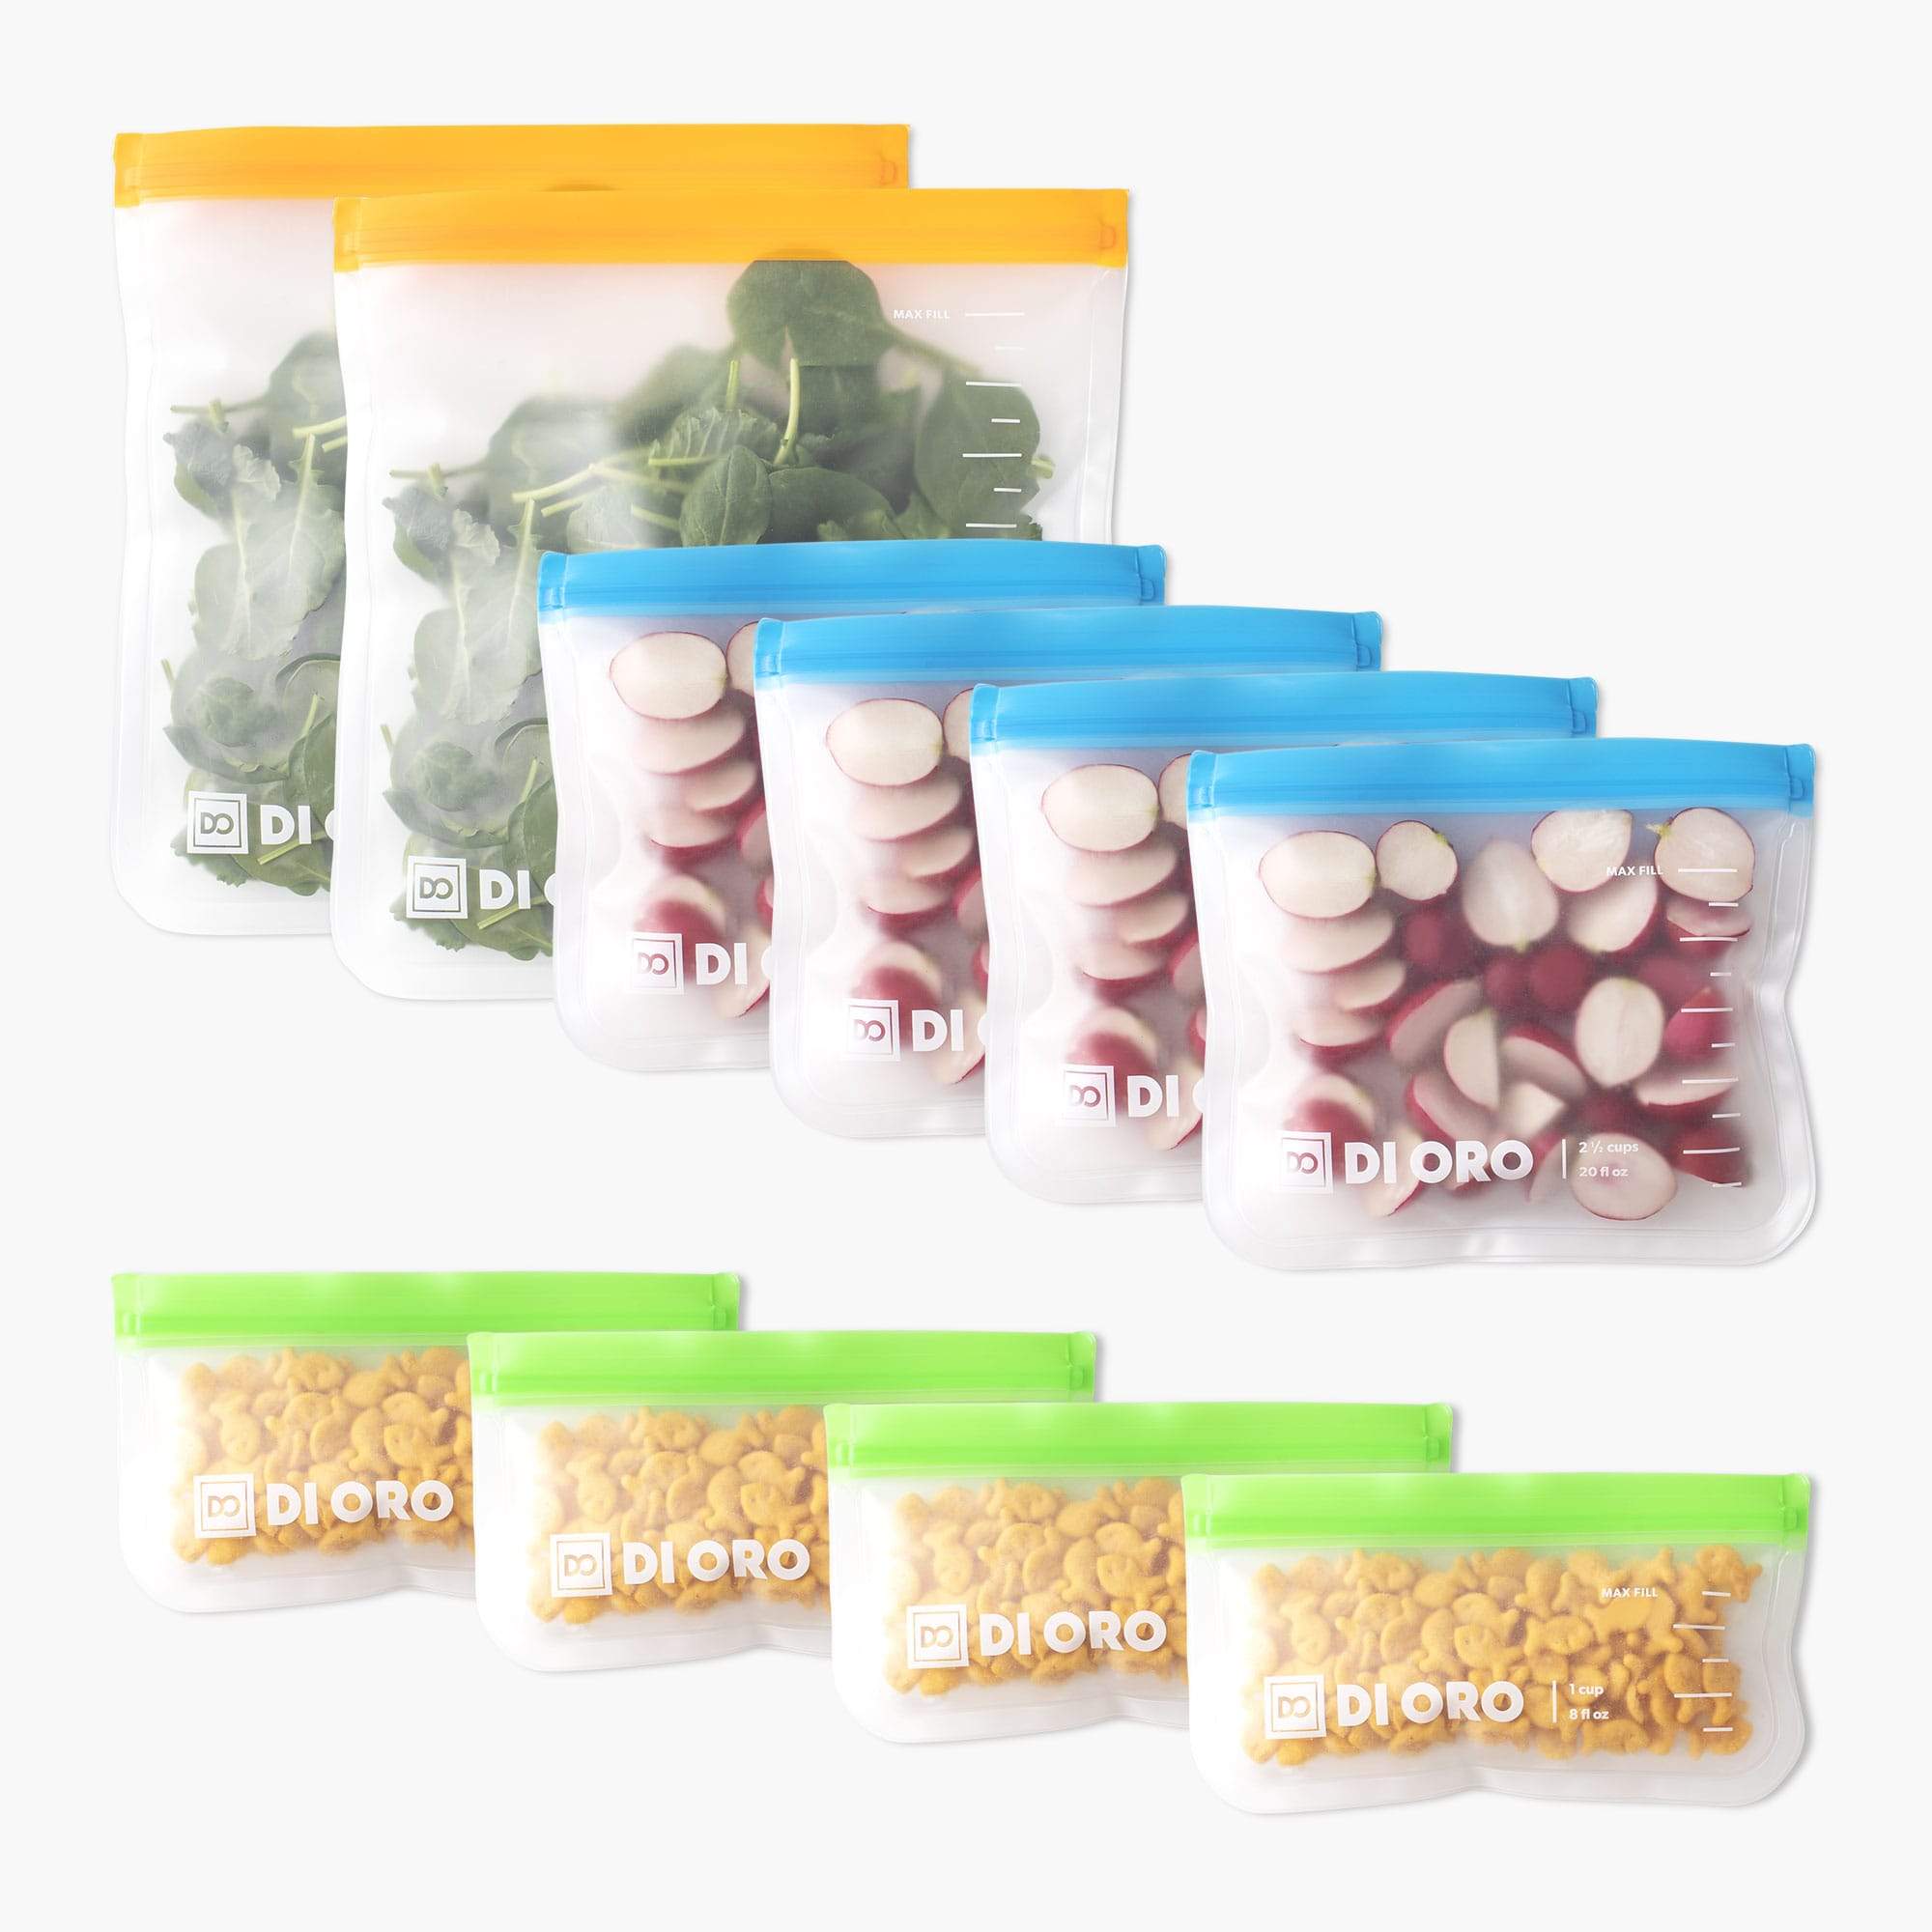 Reusable Snack Bags 